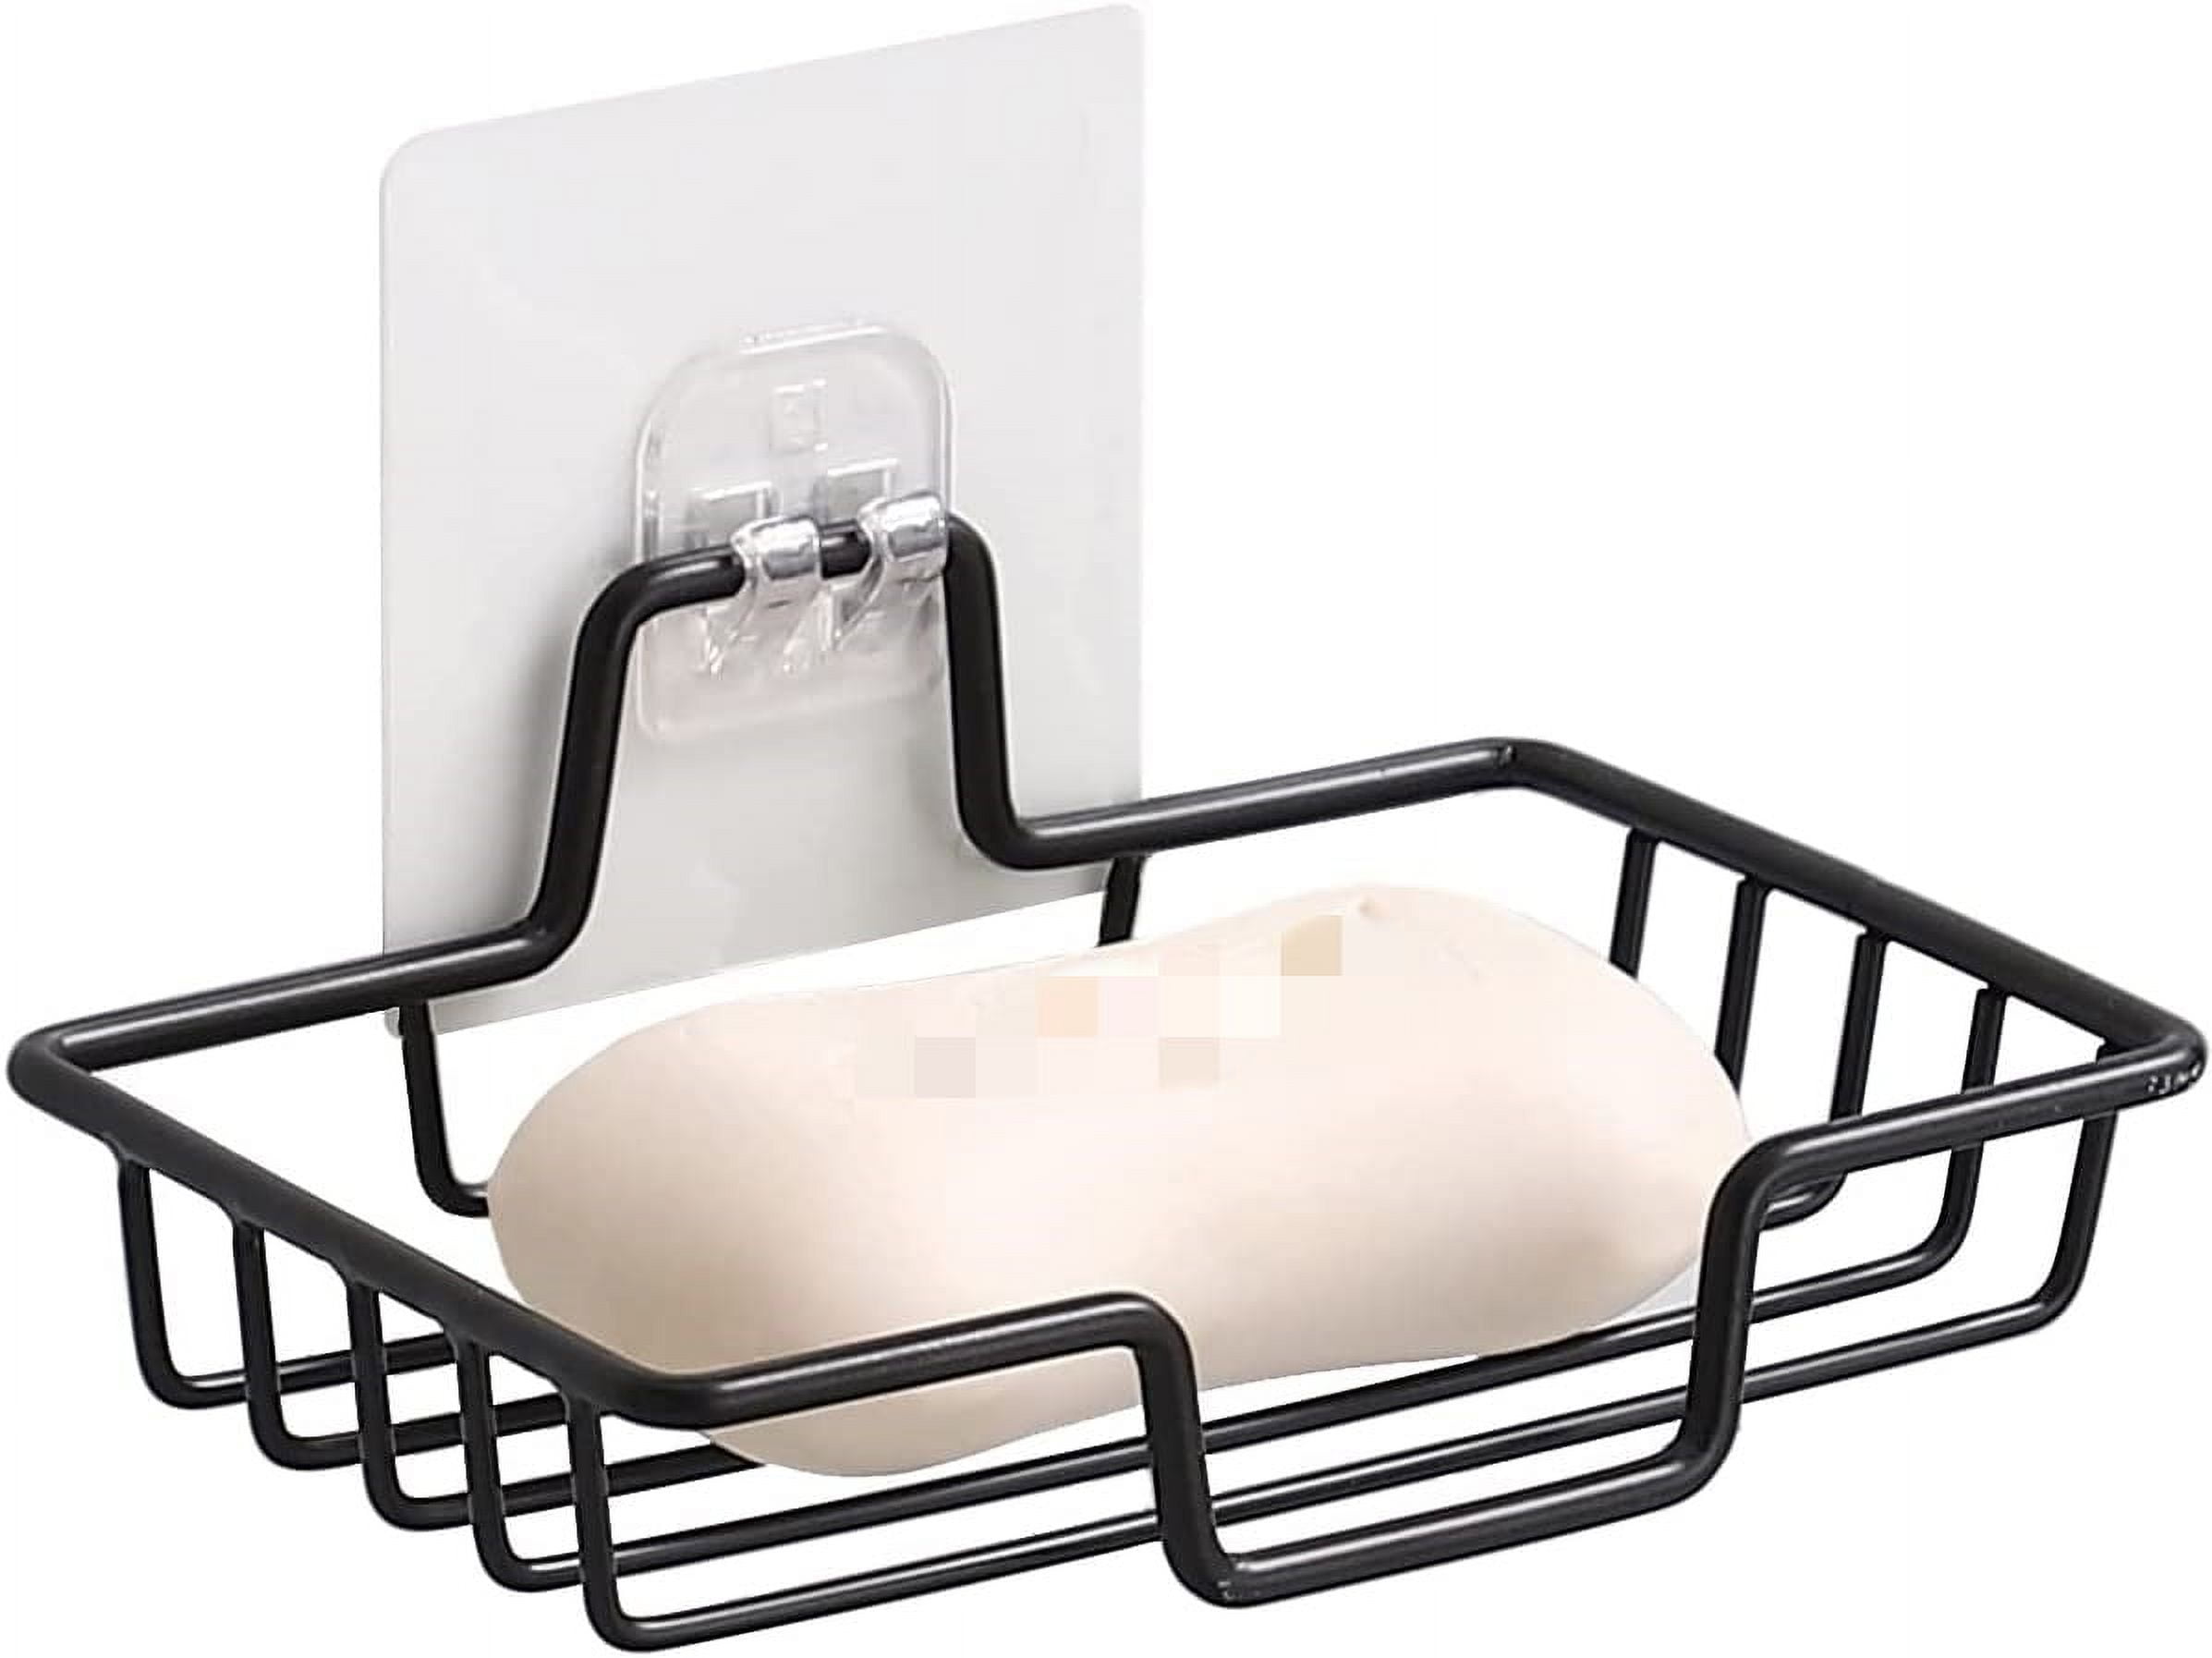 Punch-free Soap Dish Wall Mounted Adhesive Bathroom Shelf With Drain For  Soap Storage, No Nail Needed